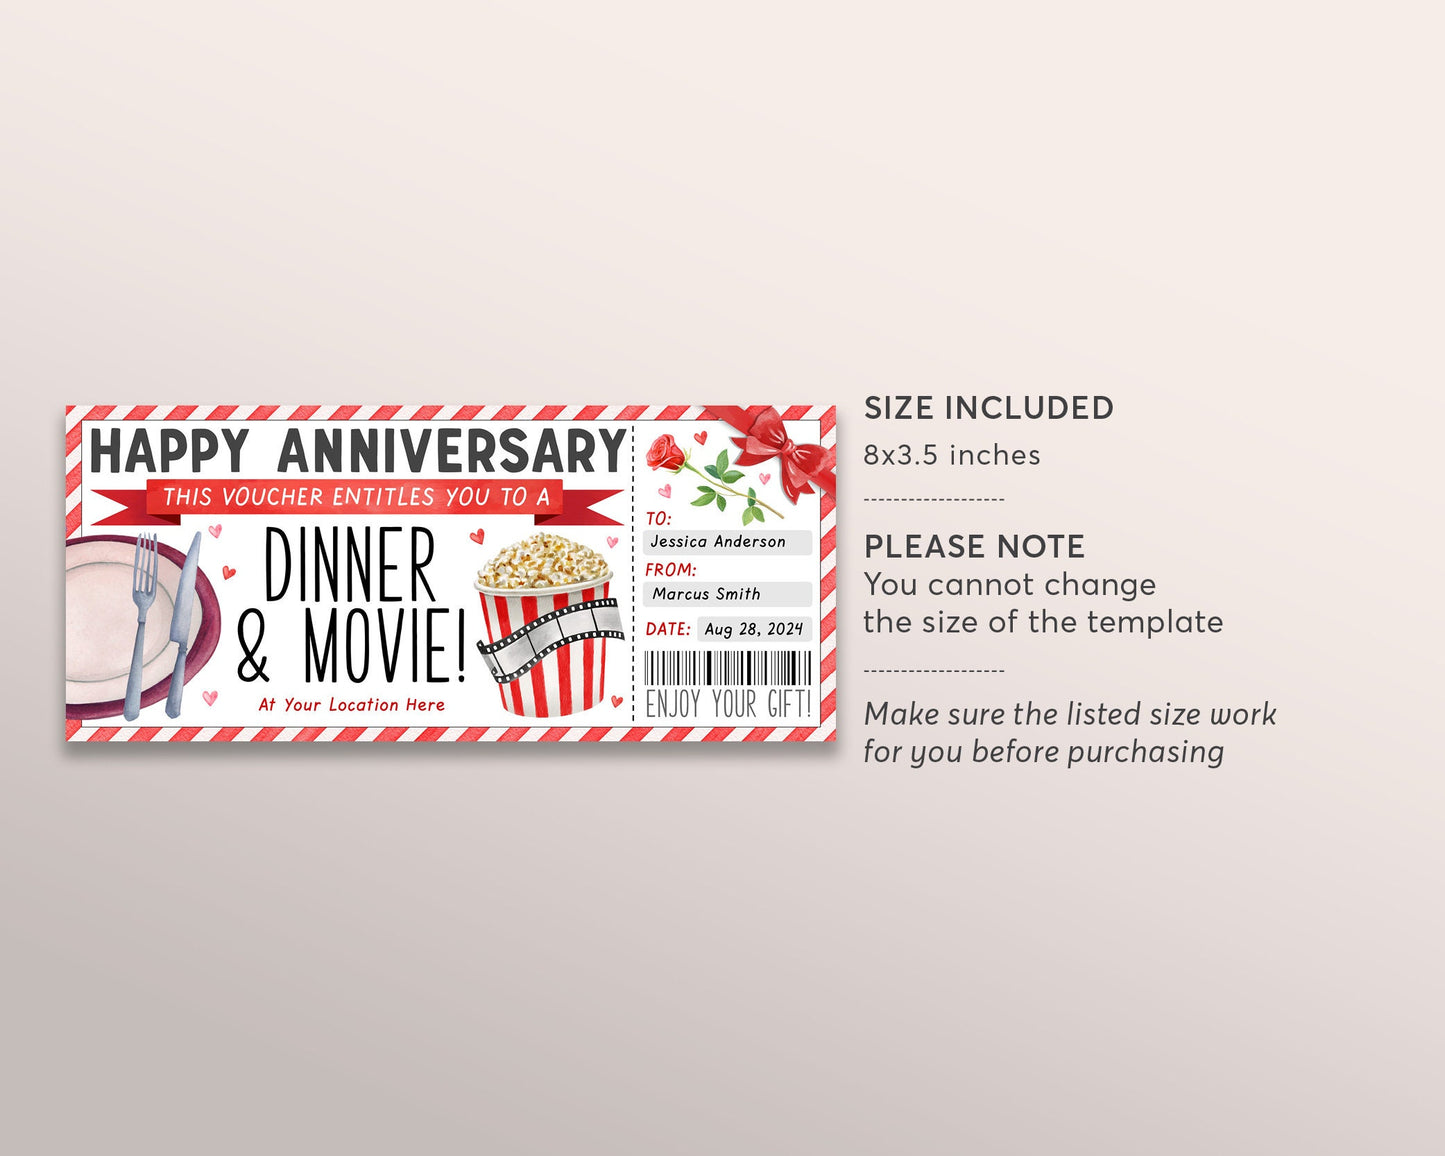 Dinner and Movie Gift Voucher Editable Template, Wedding Anniversary Surprise Date Night Restaurant Gift Certificate Reveal For Wife Husband